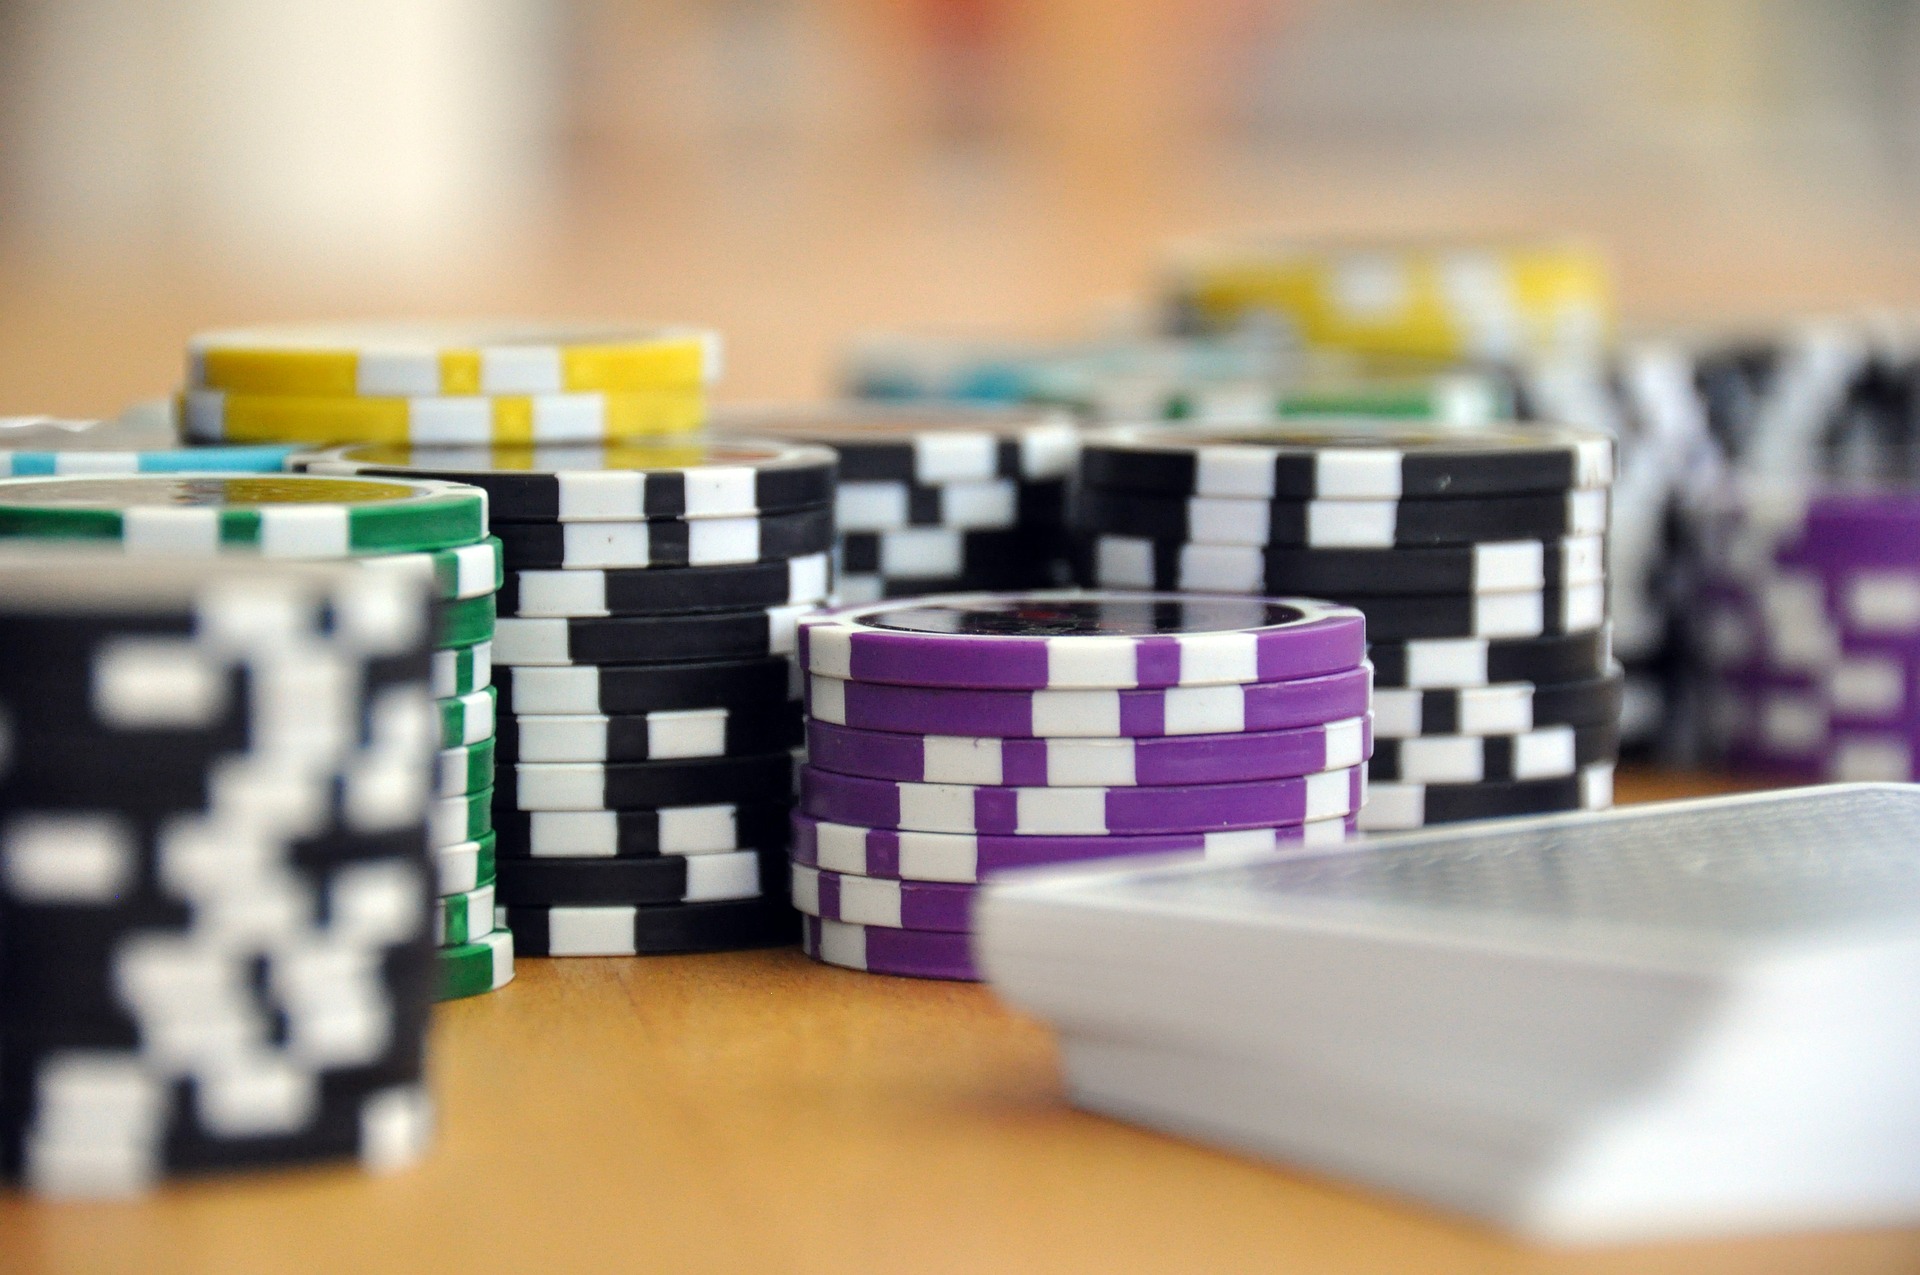 5 Incredibly Useful casino Tips For Small Businesses